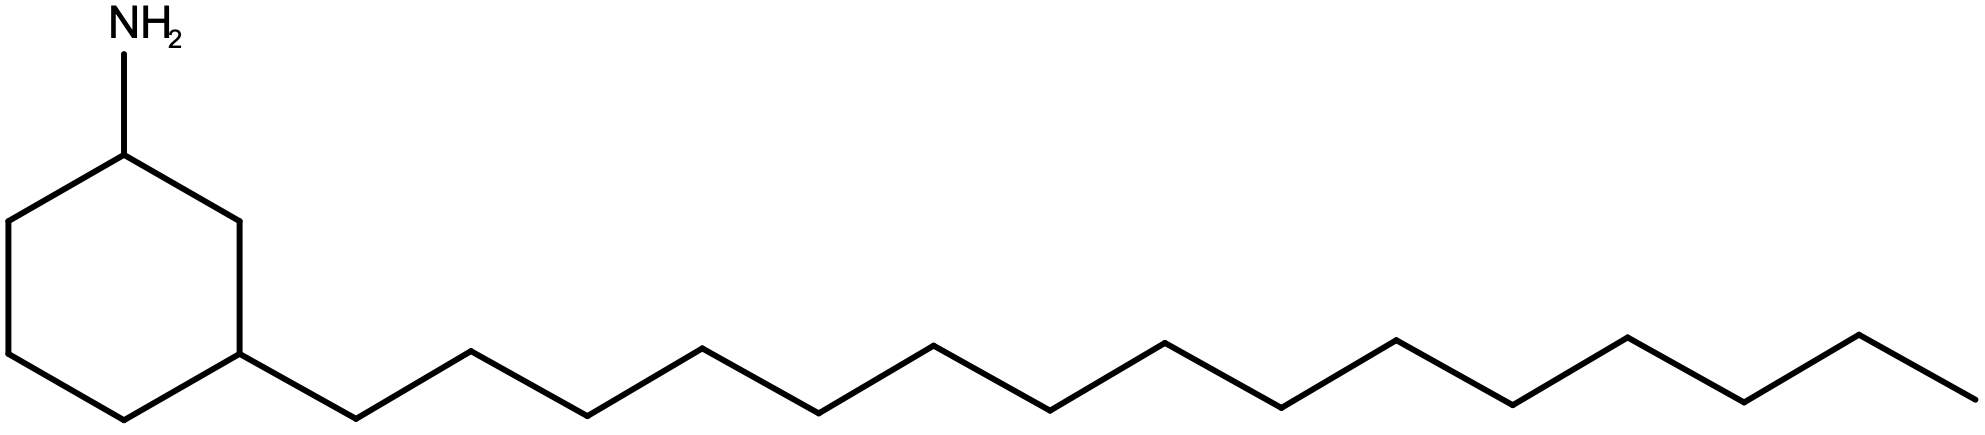 CNSL Cycloaliphatic Amine is an alternate to petroleum based Cycloaliphatic Amines